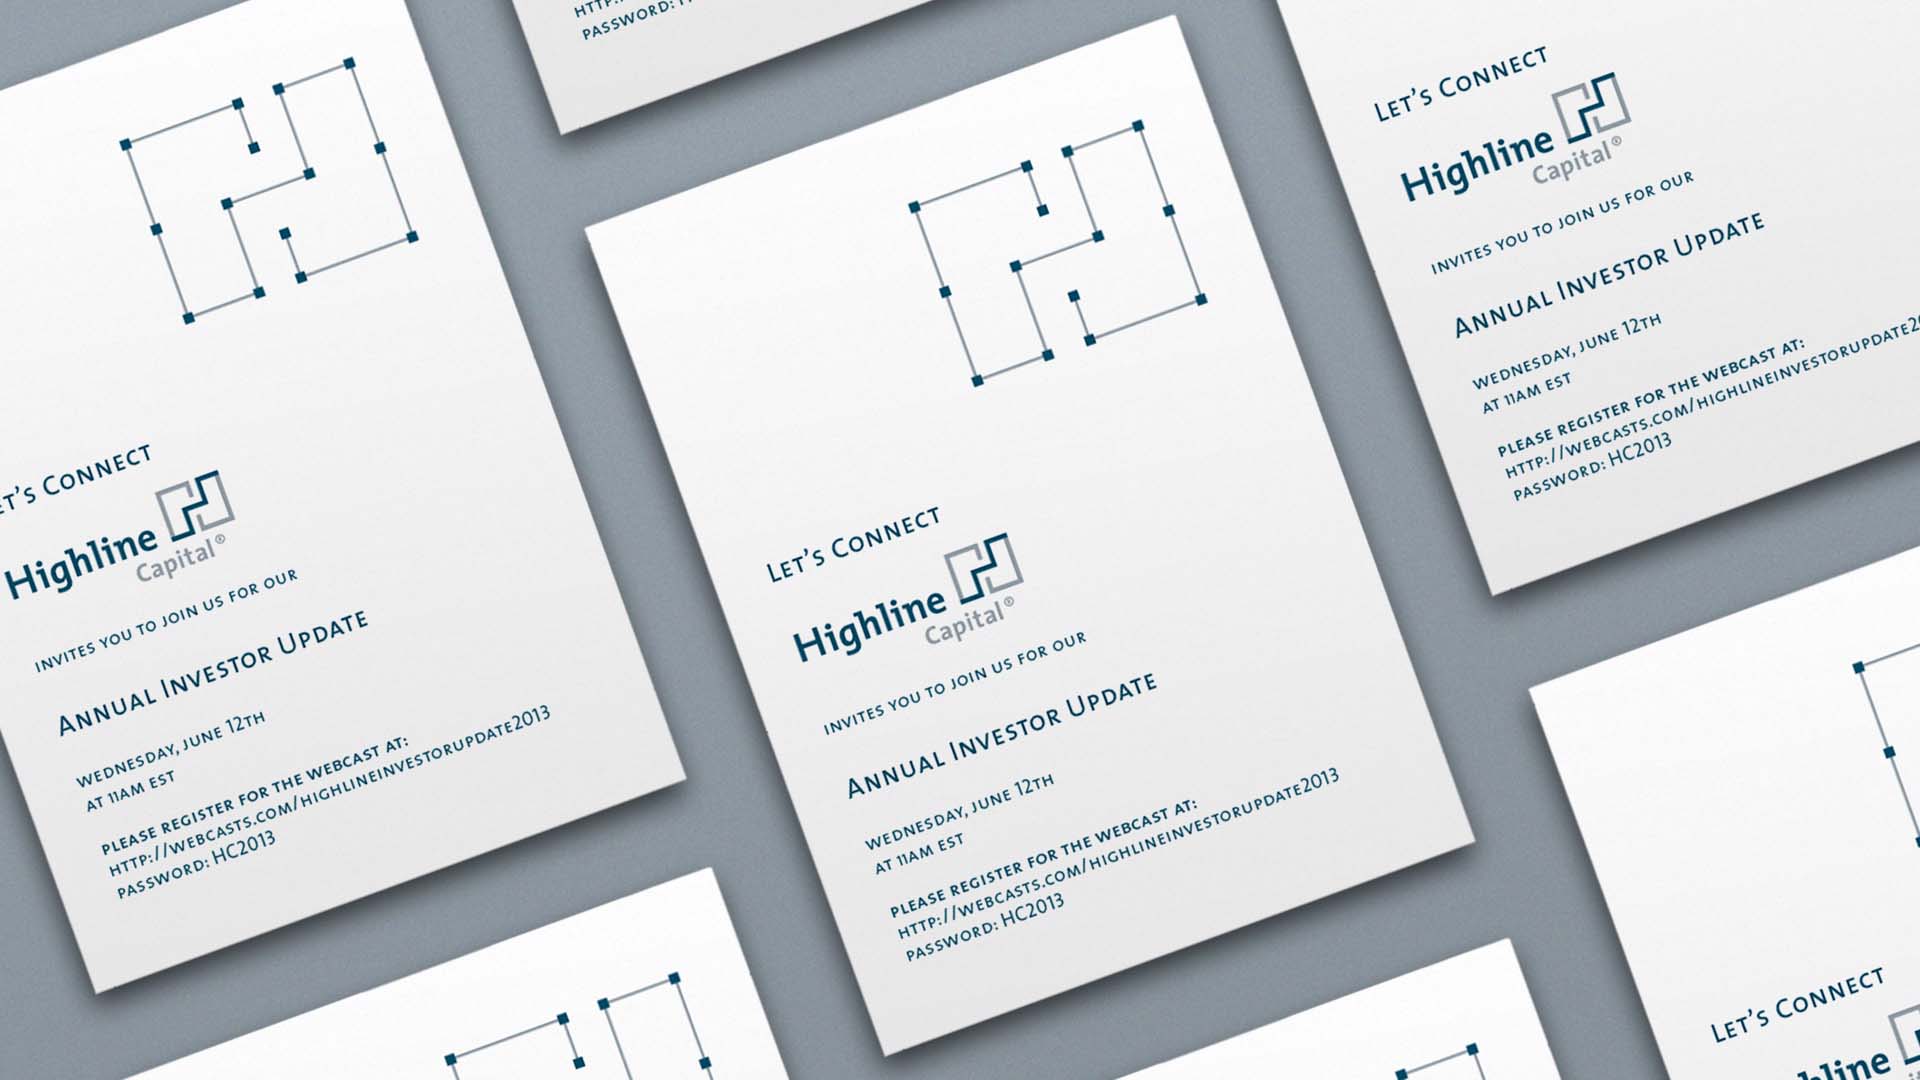 A grid of invites from Highline Capital for their Annual Investors Event.